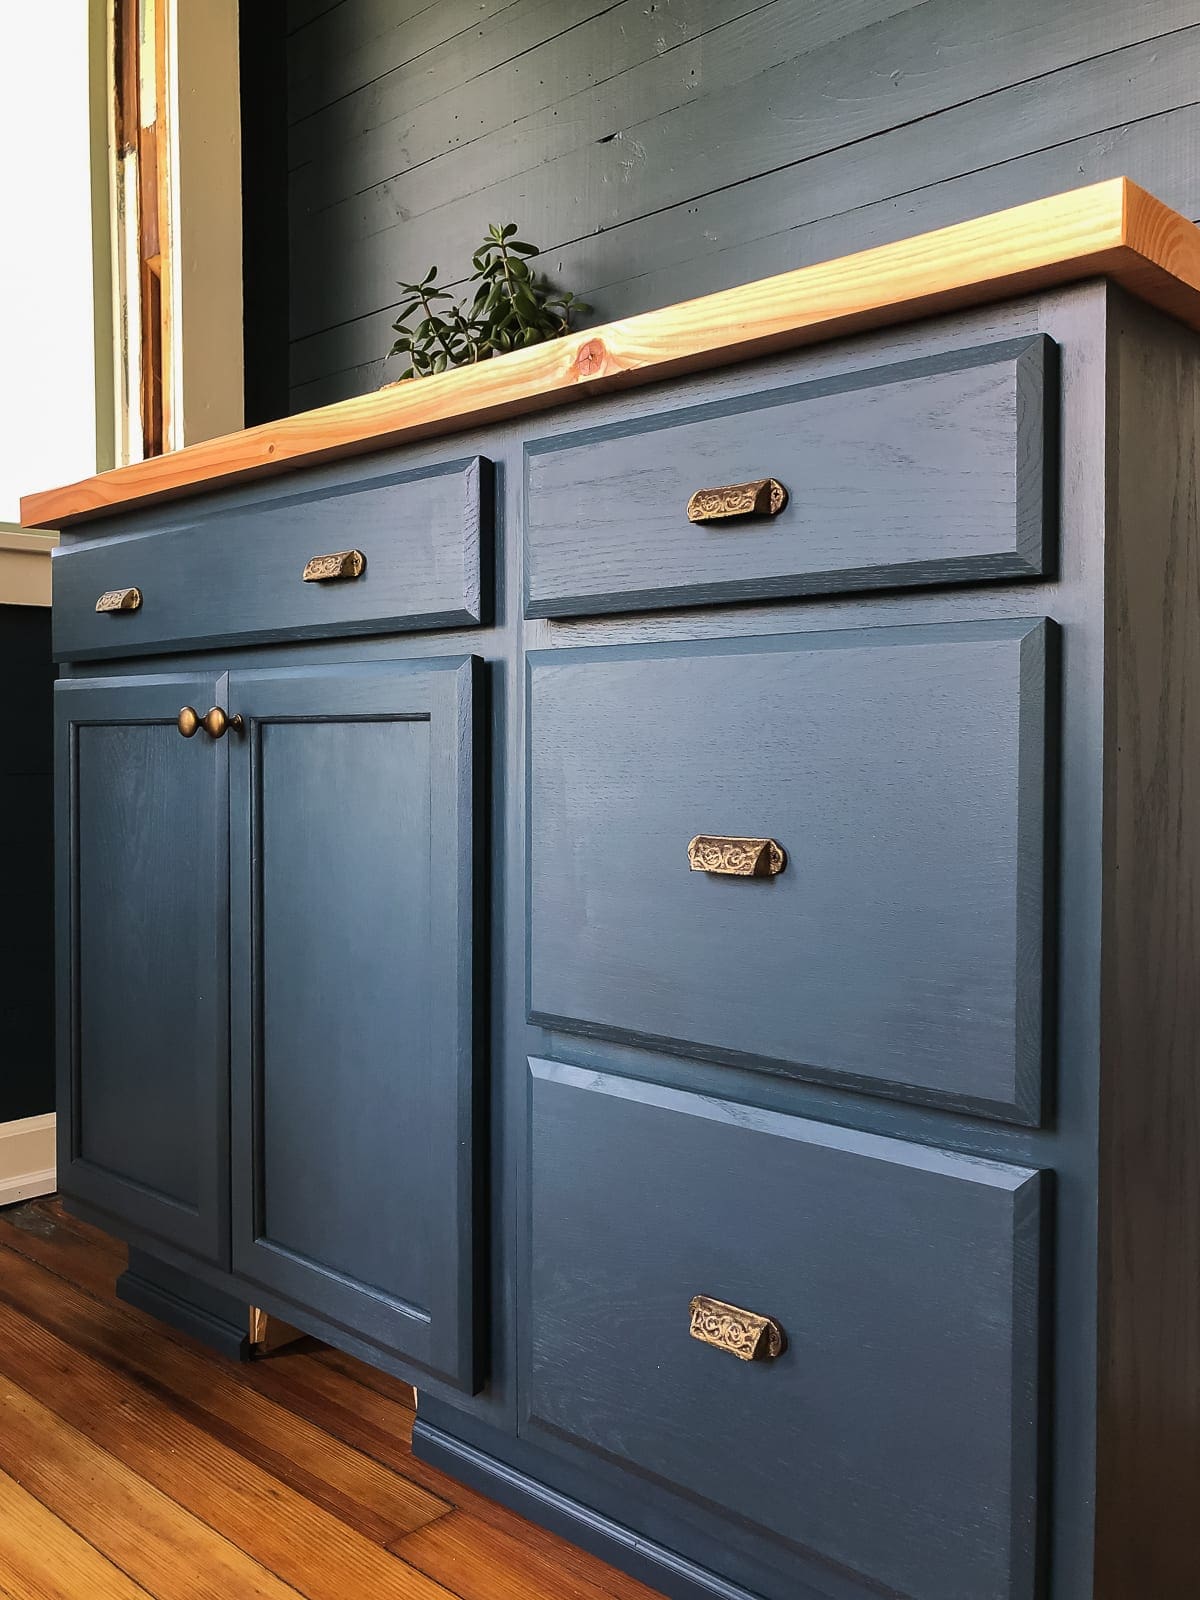 Painting Unfinished Cabinets How To, How To Paint Birch Cabinets